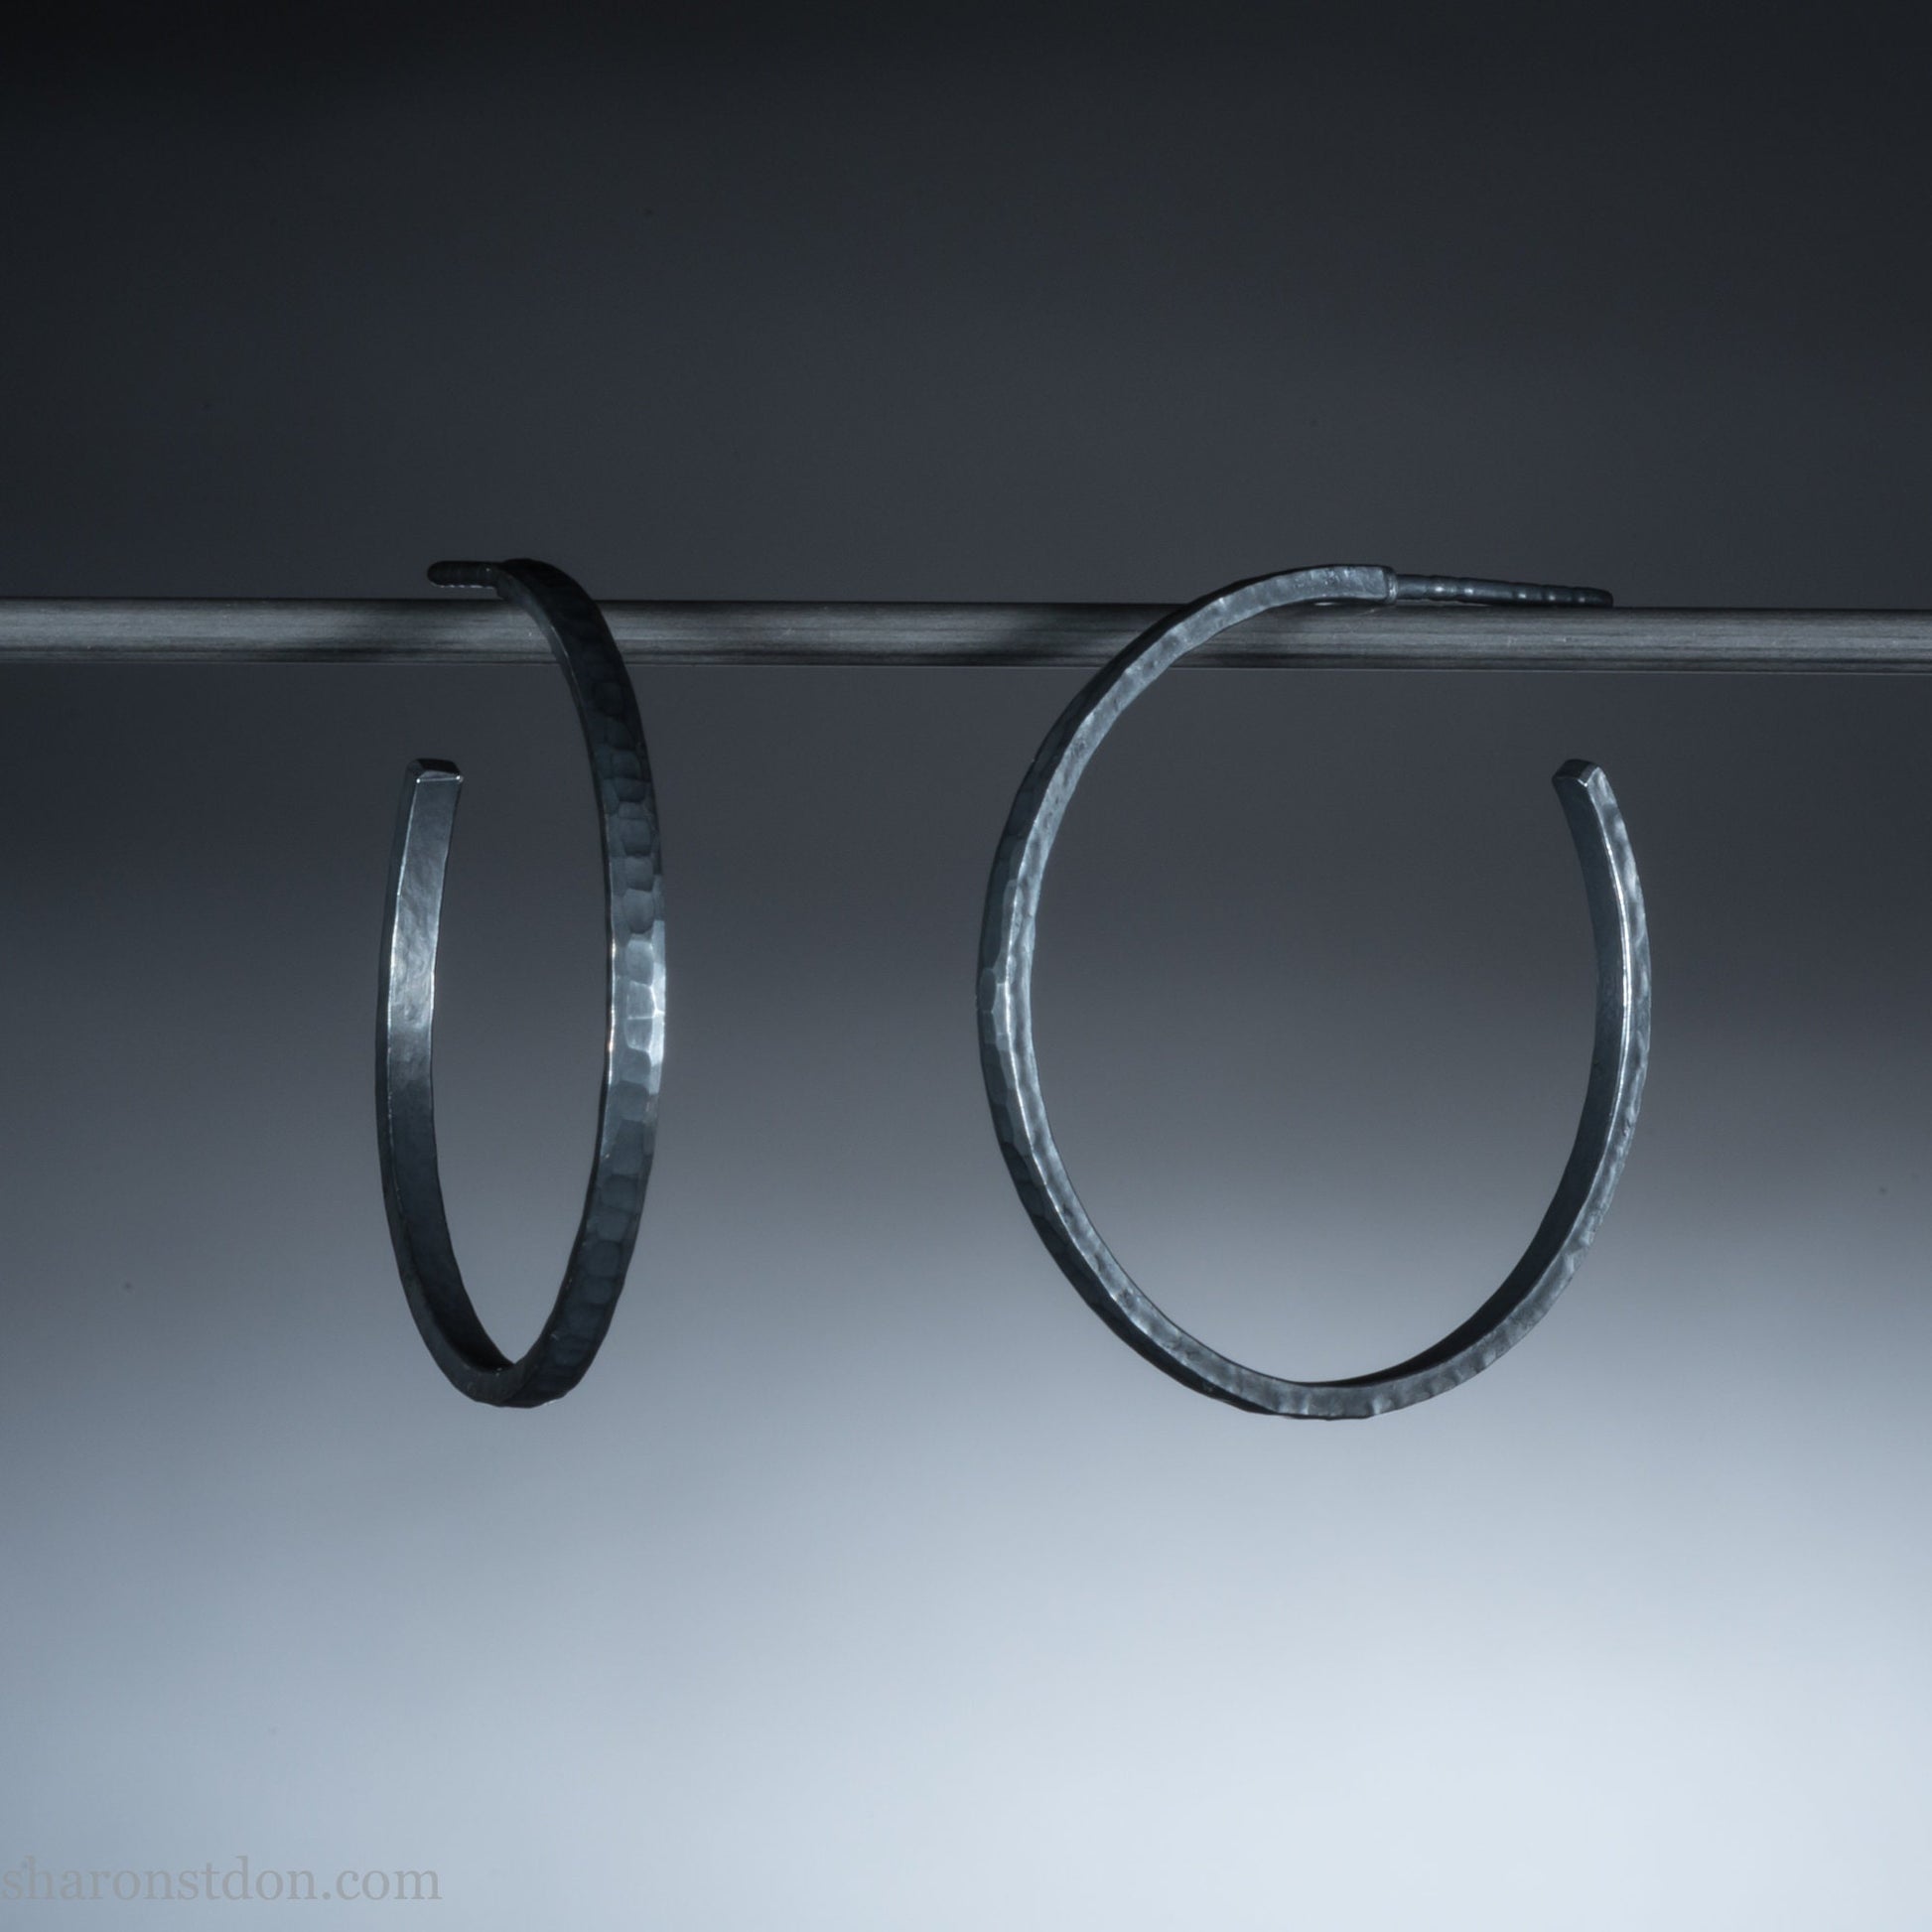 925 sterling silver hoop earrings handmade  for women by Sharon SaintDon in the USA. 30mm diameter, 2mm wide, solid hammered silver, oxidized black.